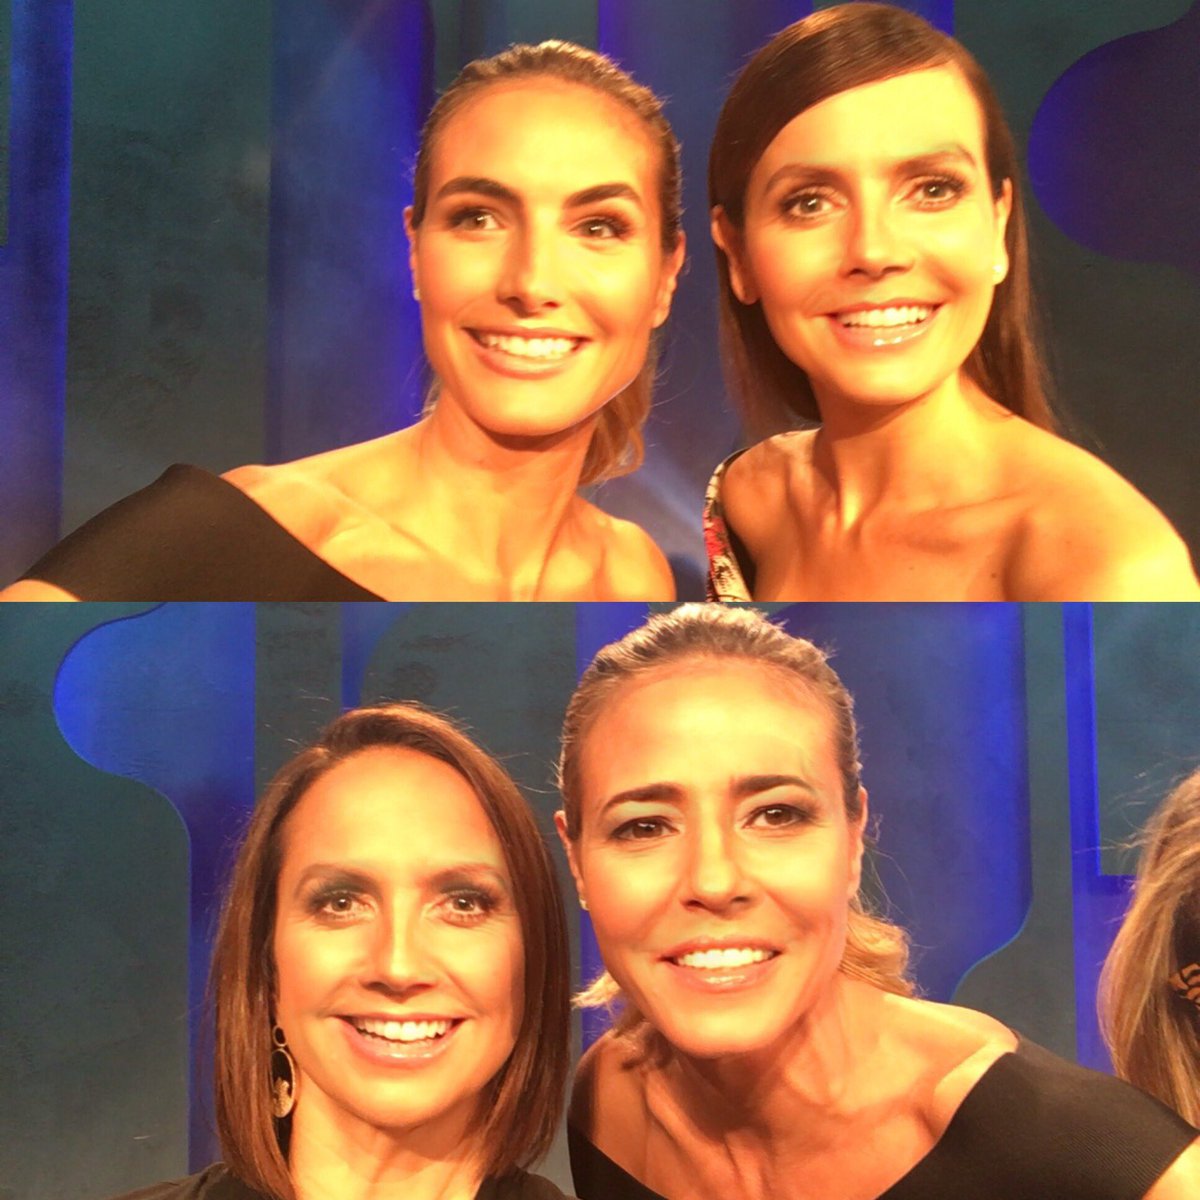 We have 2 guest judges tonight on @ProjectRunway! Who do you think they are? #FaceSwap https://t.co/U3DvnRshh6